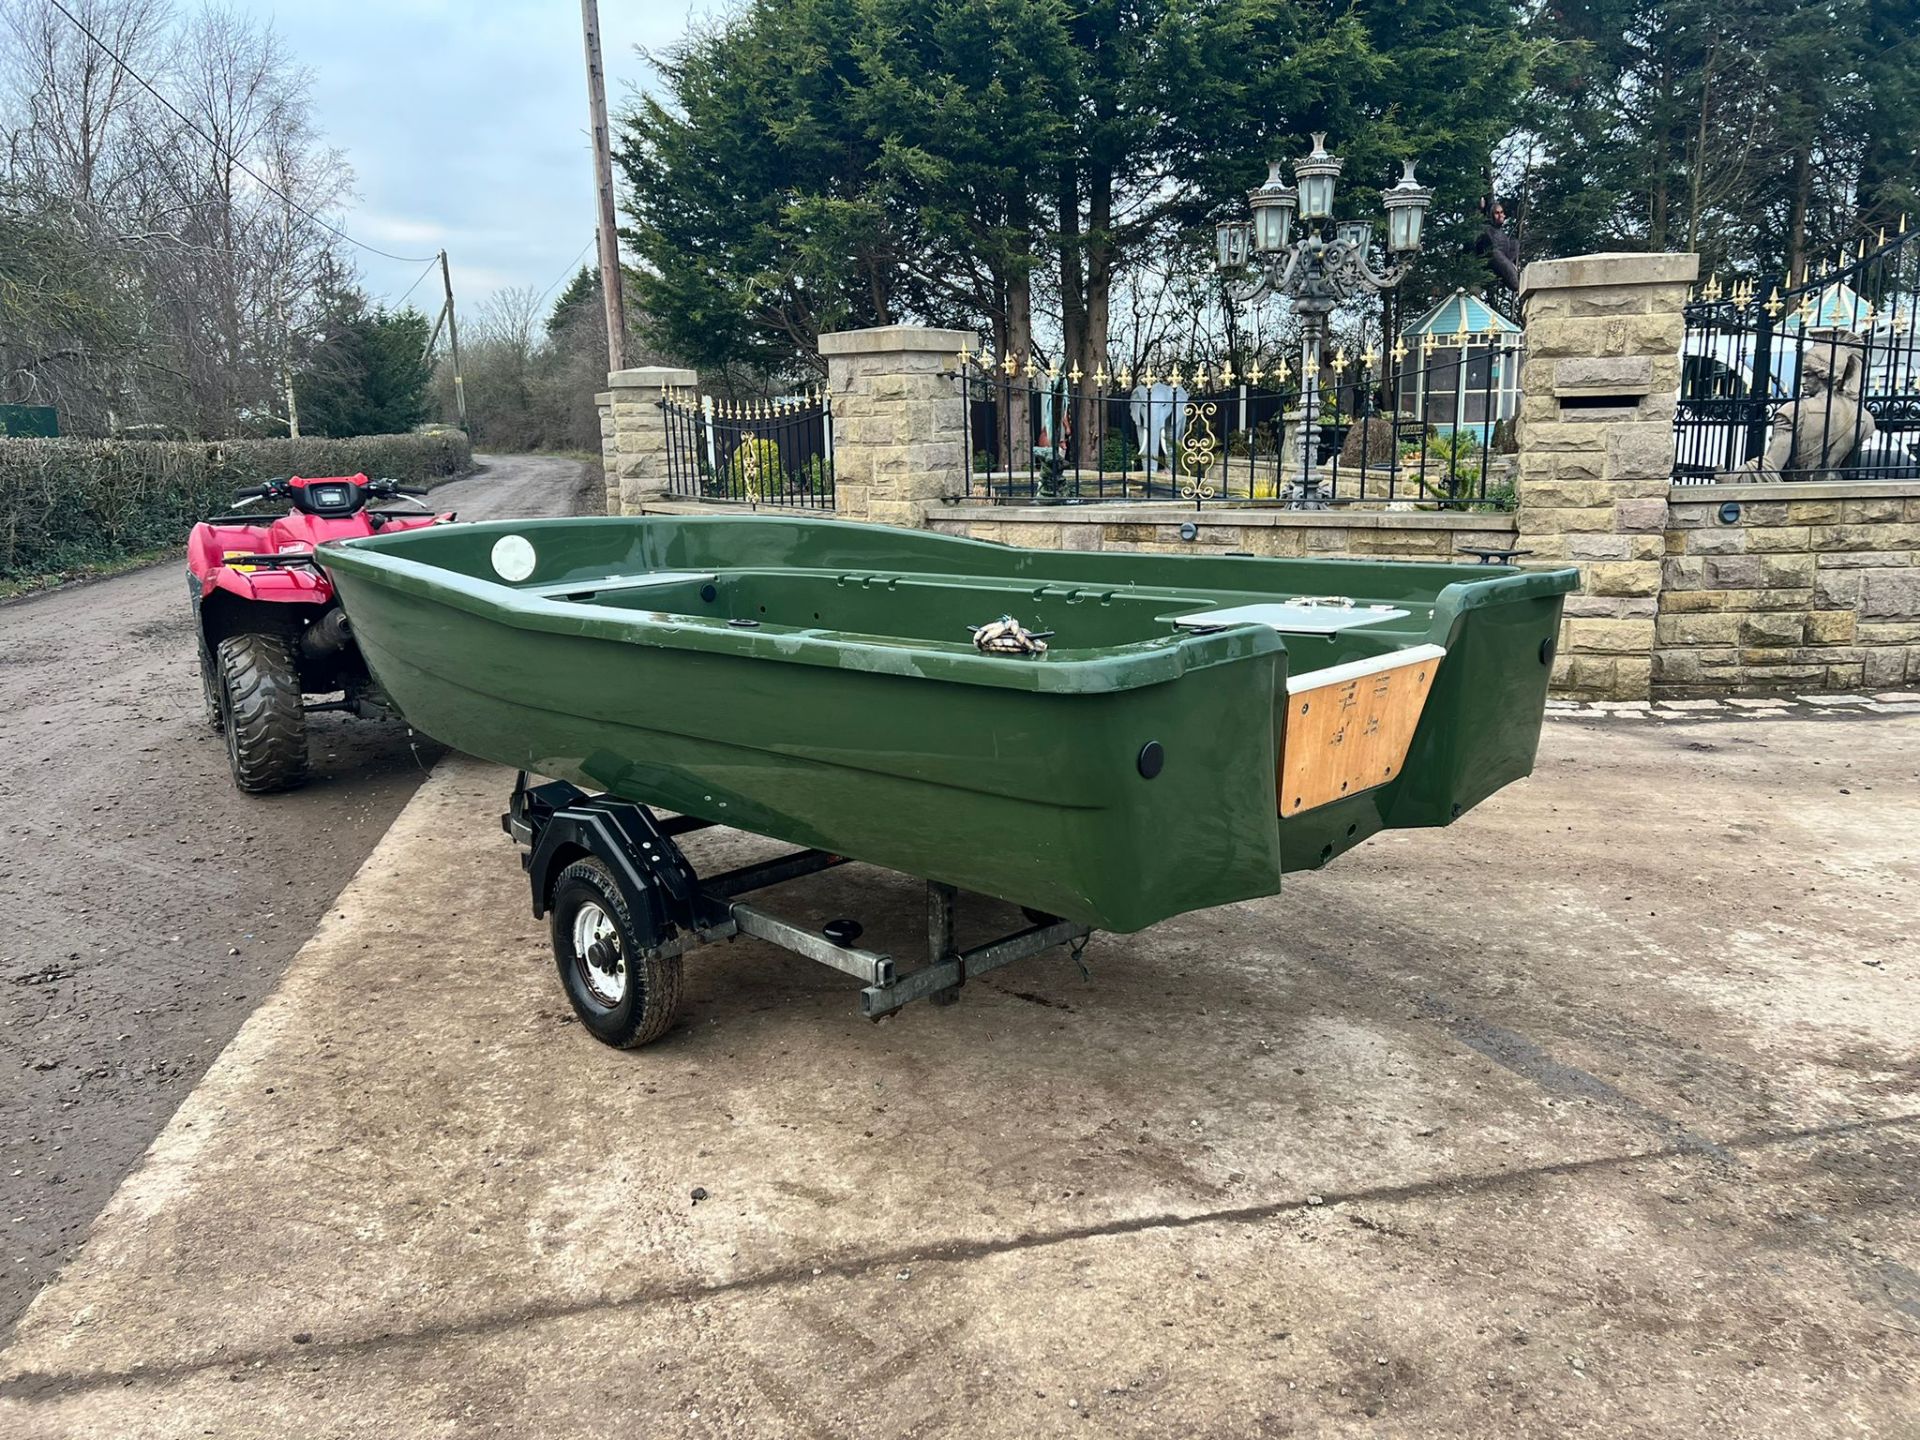 RIGFLEX AQUAPECHE 370 BOAT ON INDESPENSION MERIT SINGLE AXEL SPORT BOAT TRAILER WITH WINCH *PLUS VAT - Image 3 of 13